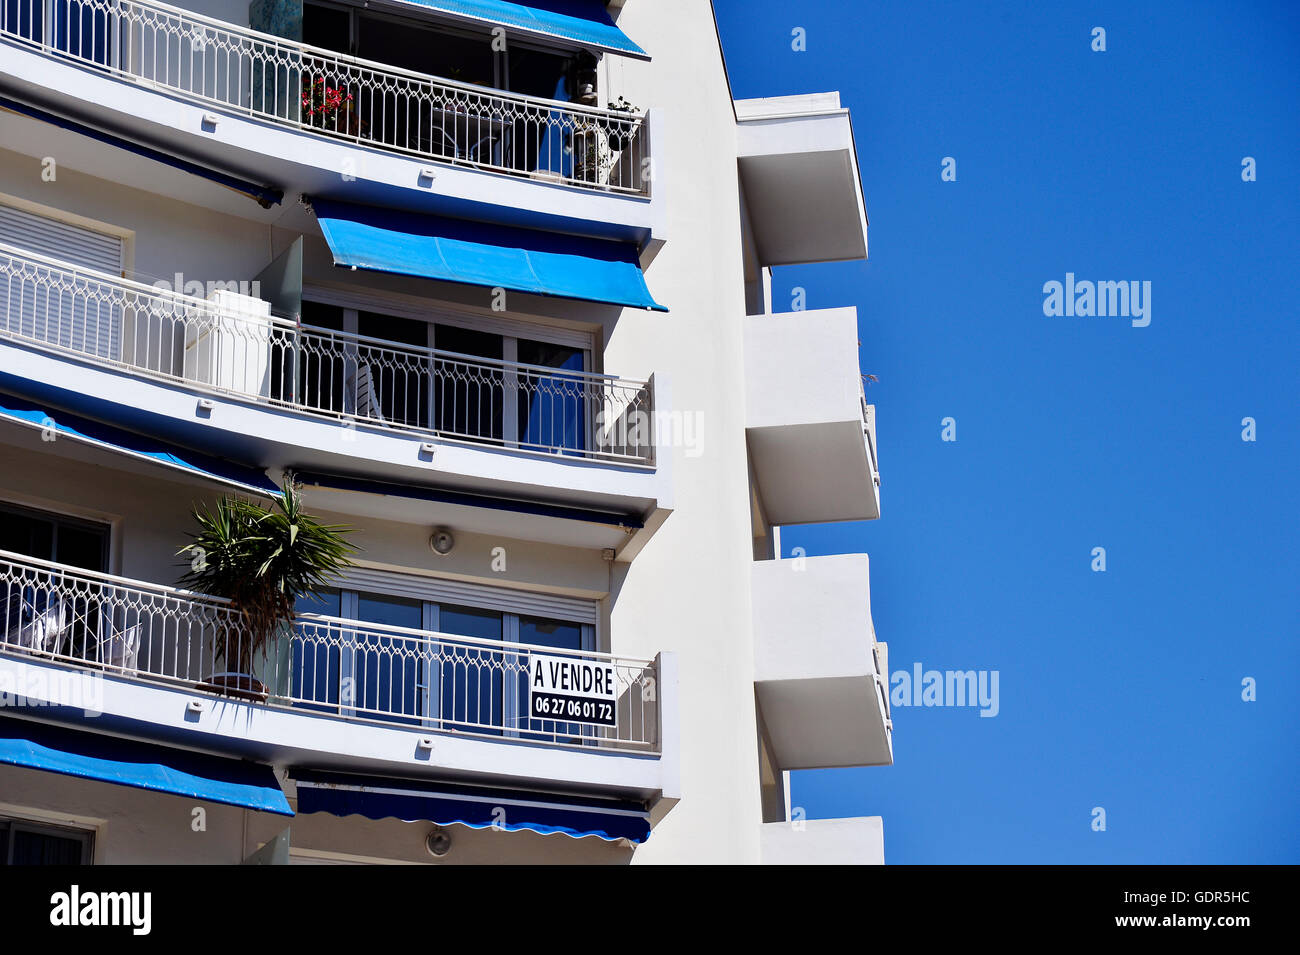 Flat for sale, Juan les pins, french riviera, france Stock Photo